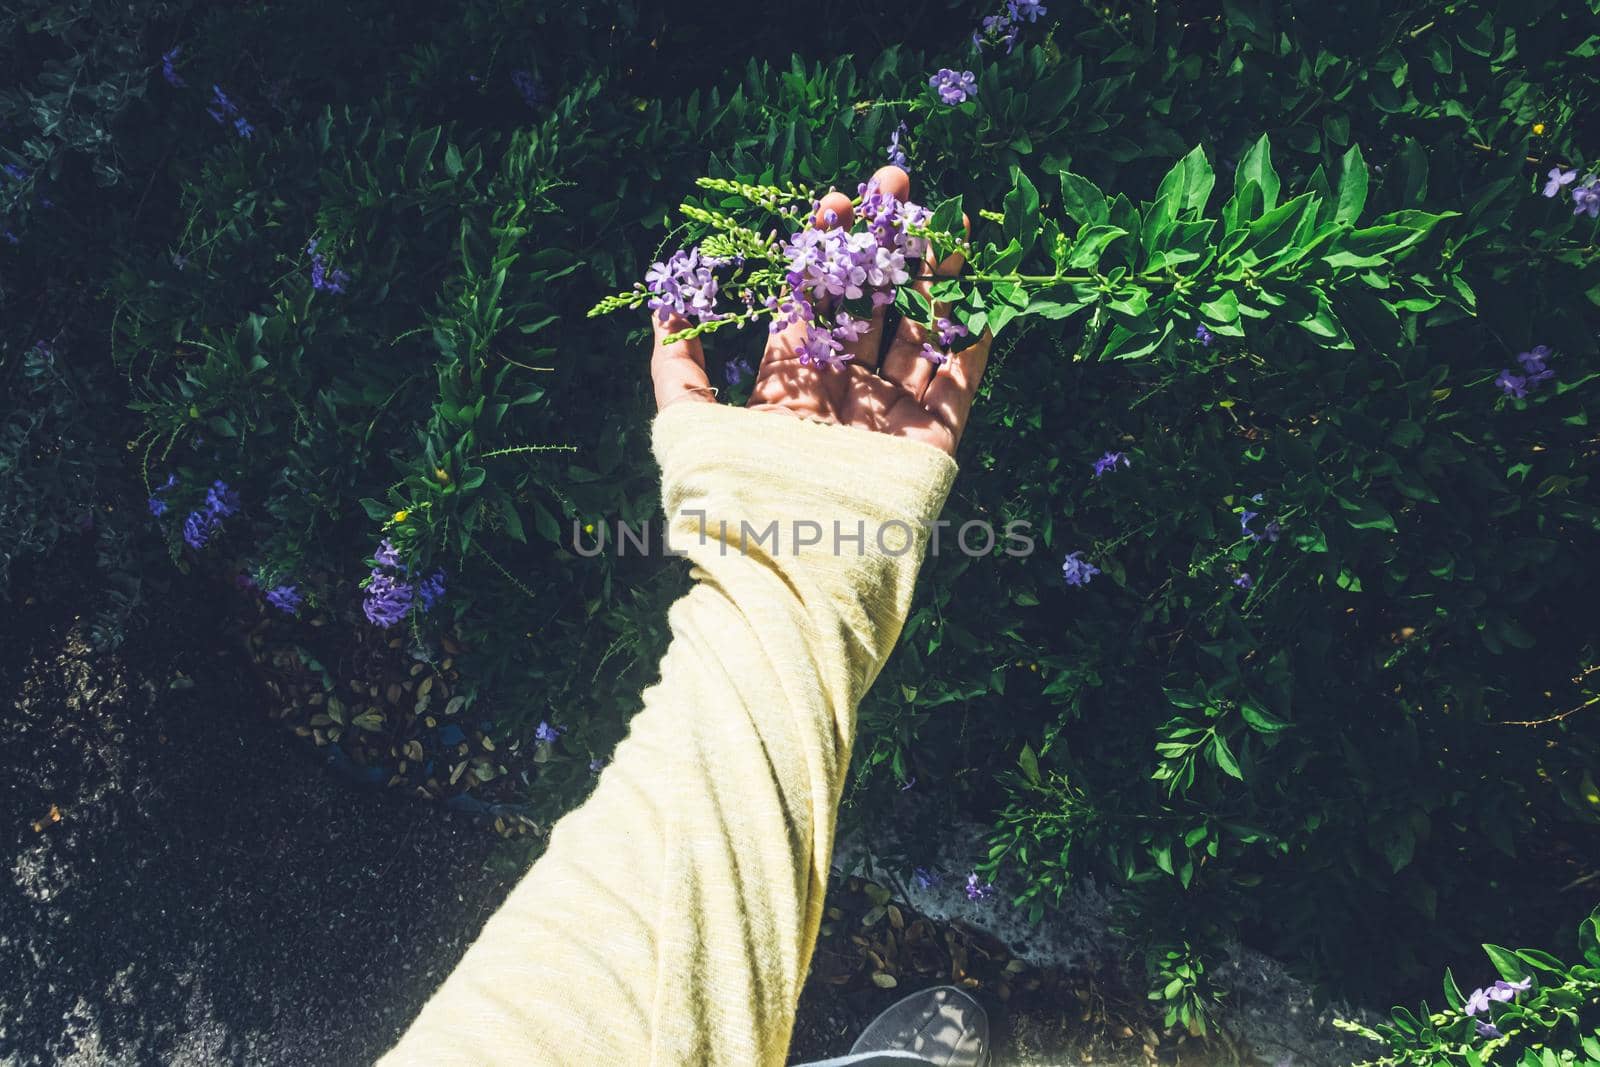 hand touching violet color flowers in a garden nature background